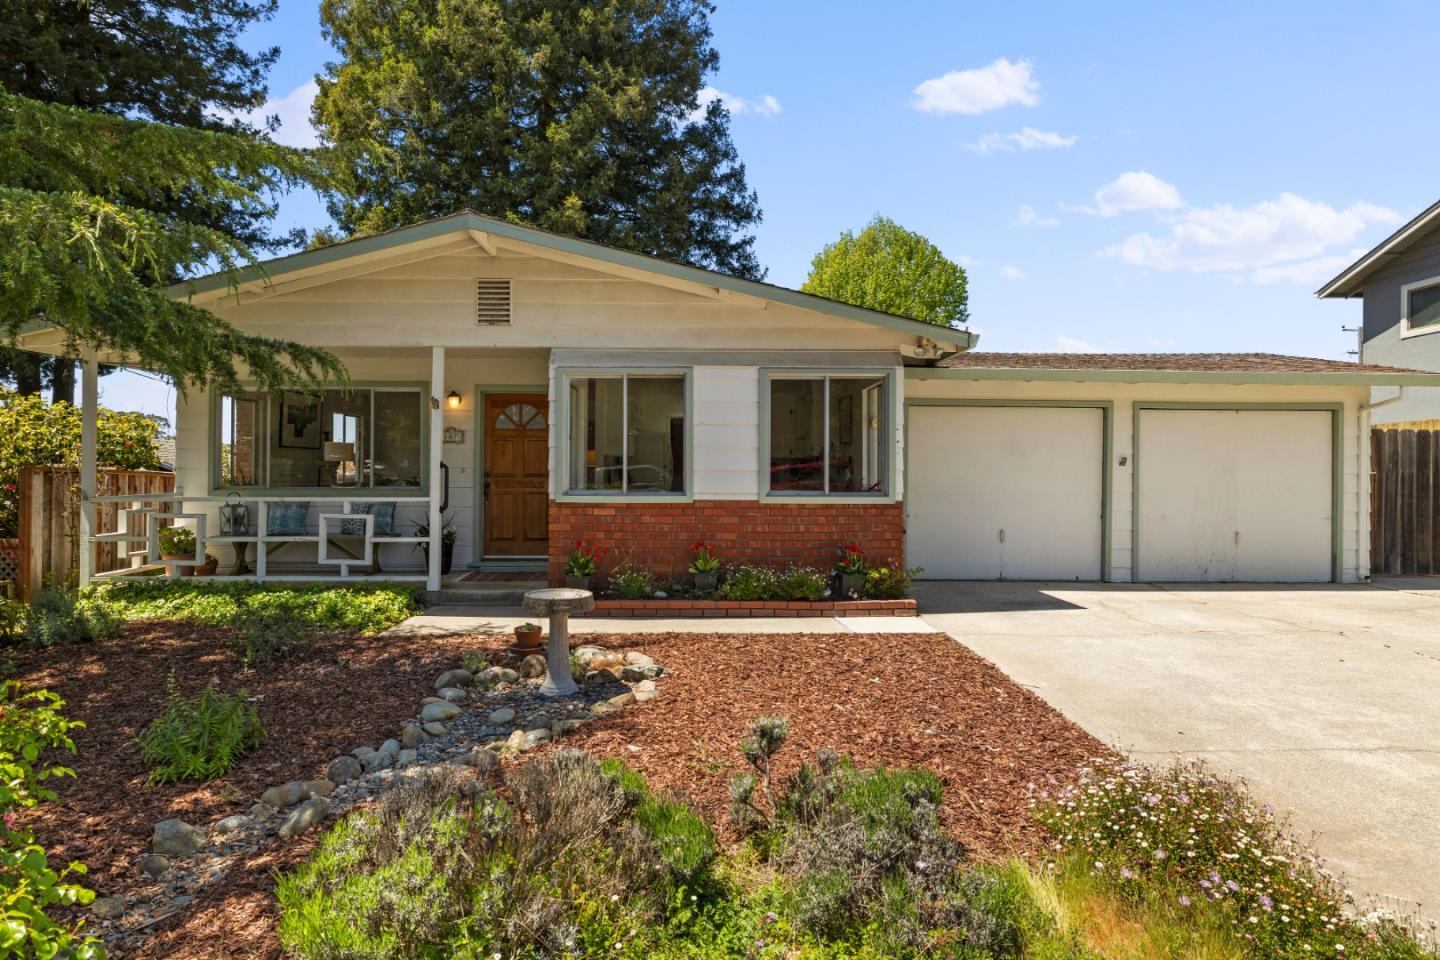 Photo of 807 Rosedale Ave in Capitola, CA